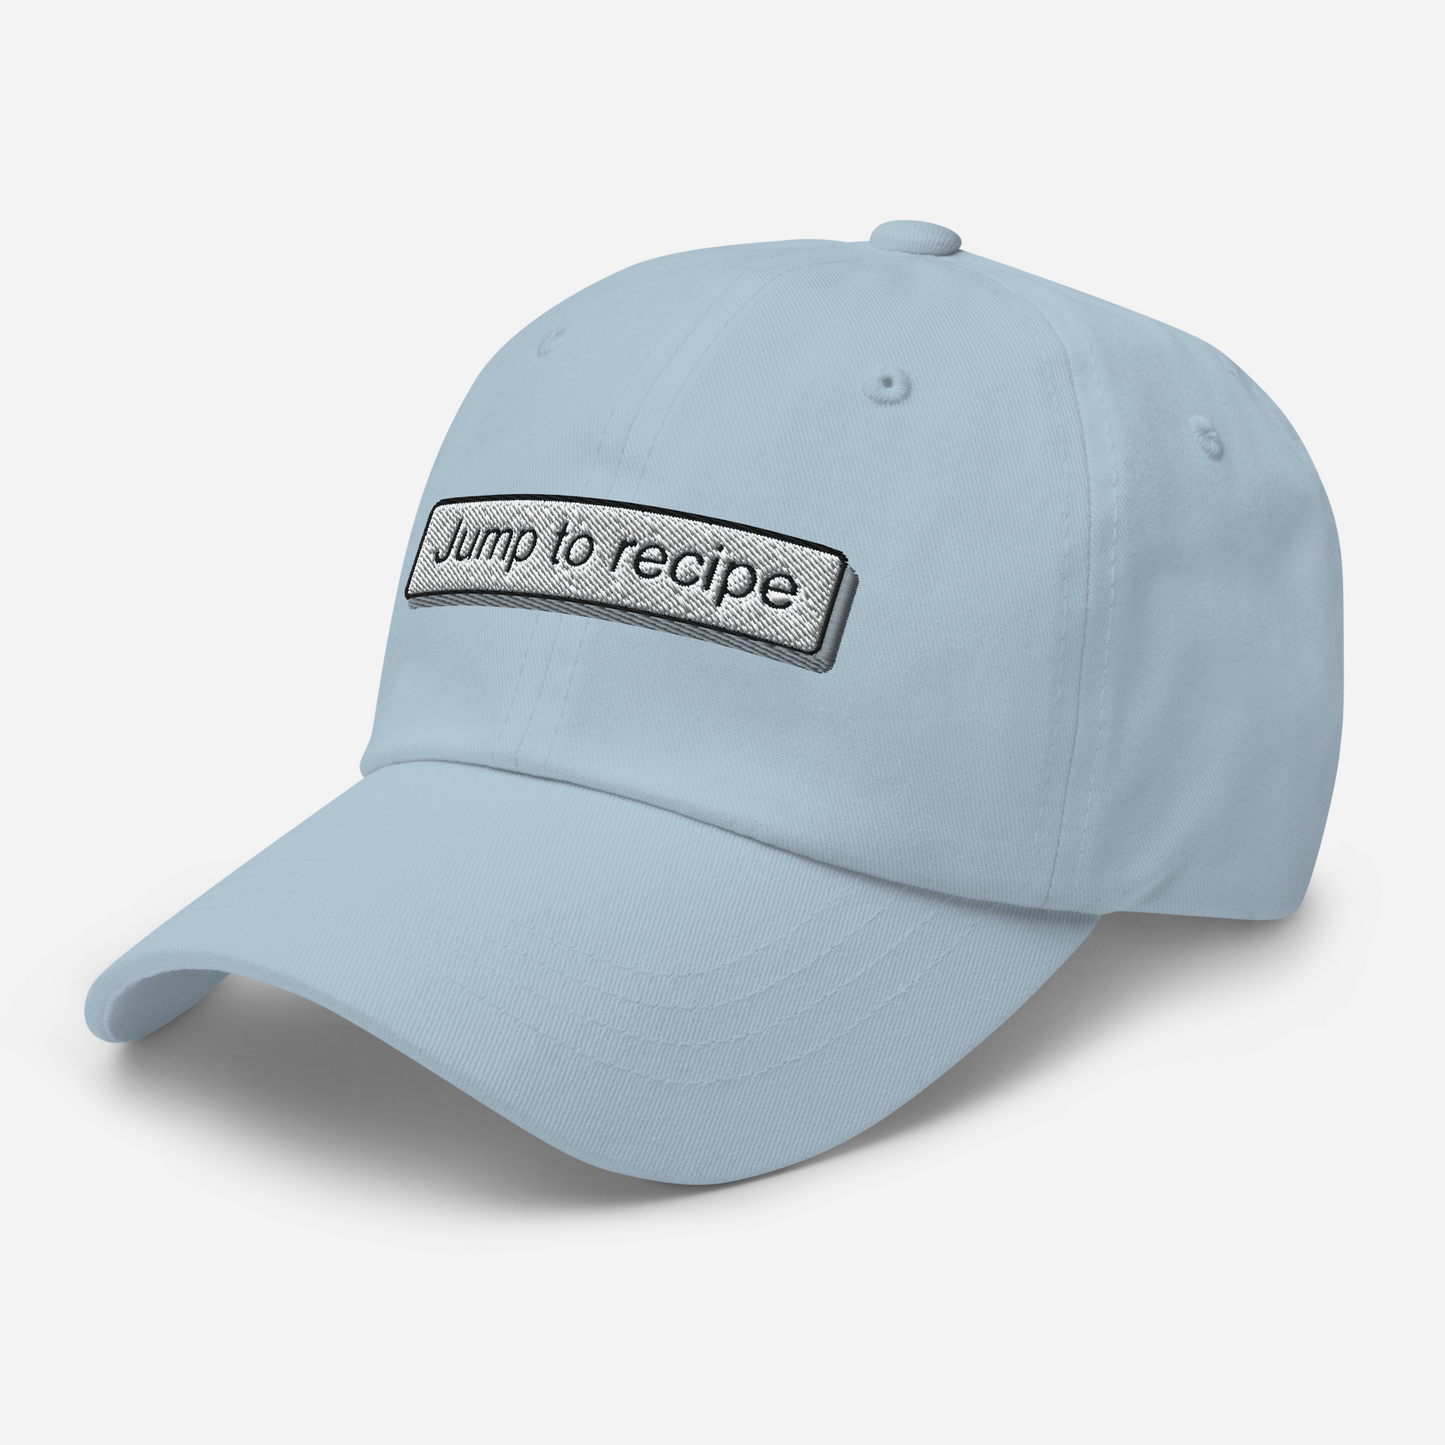 Jump to recipe dad hat